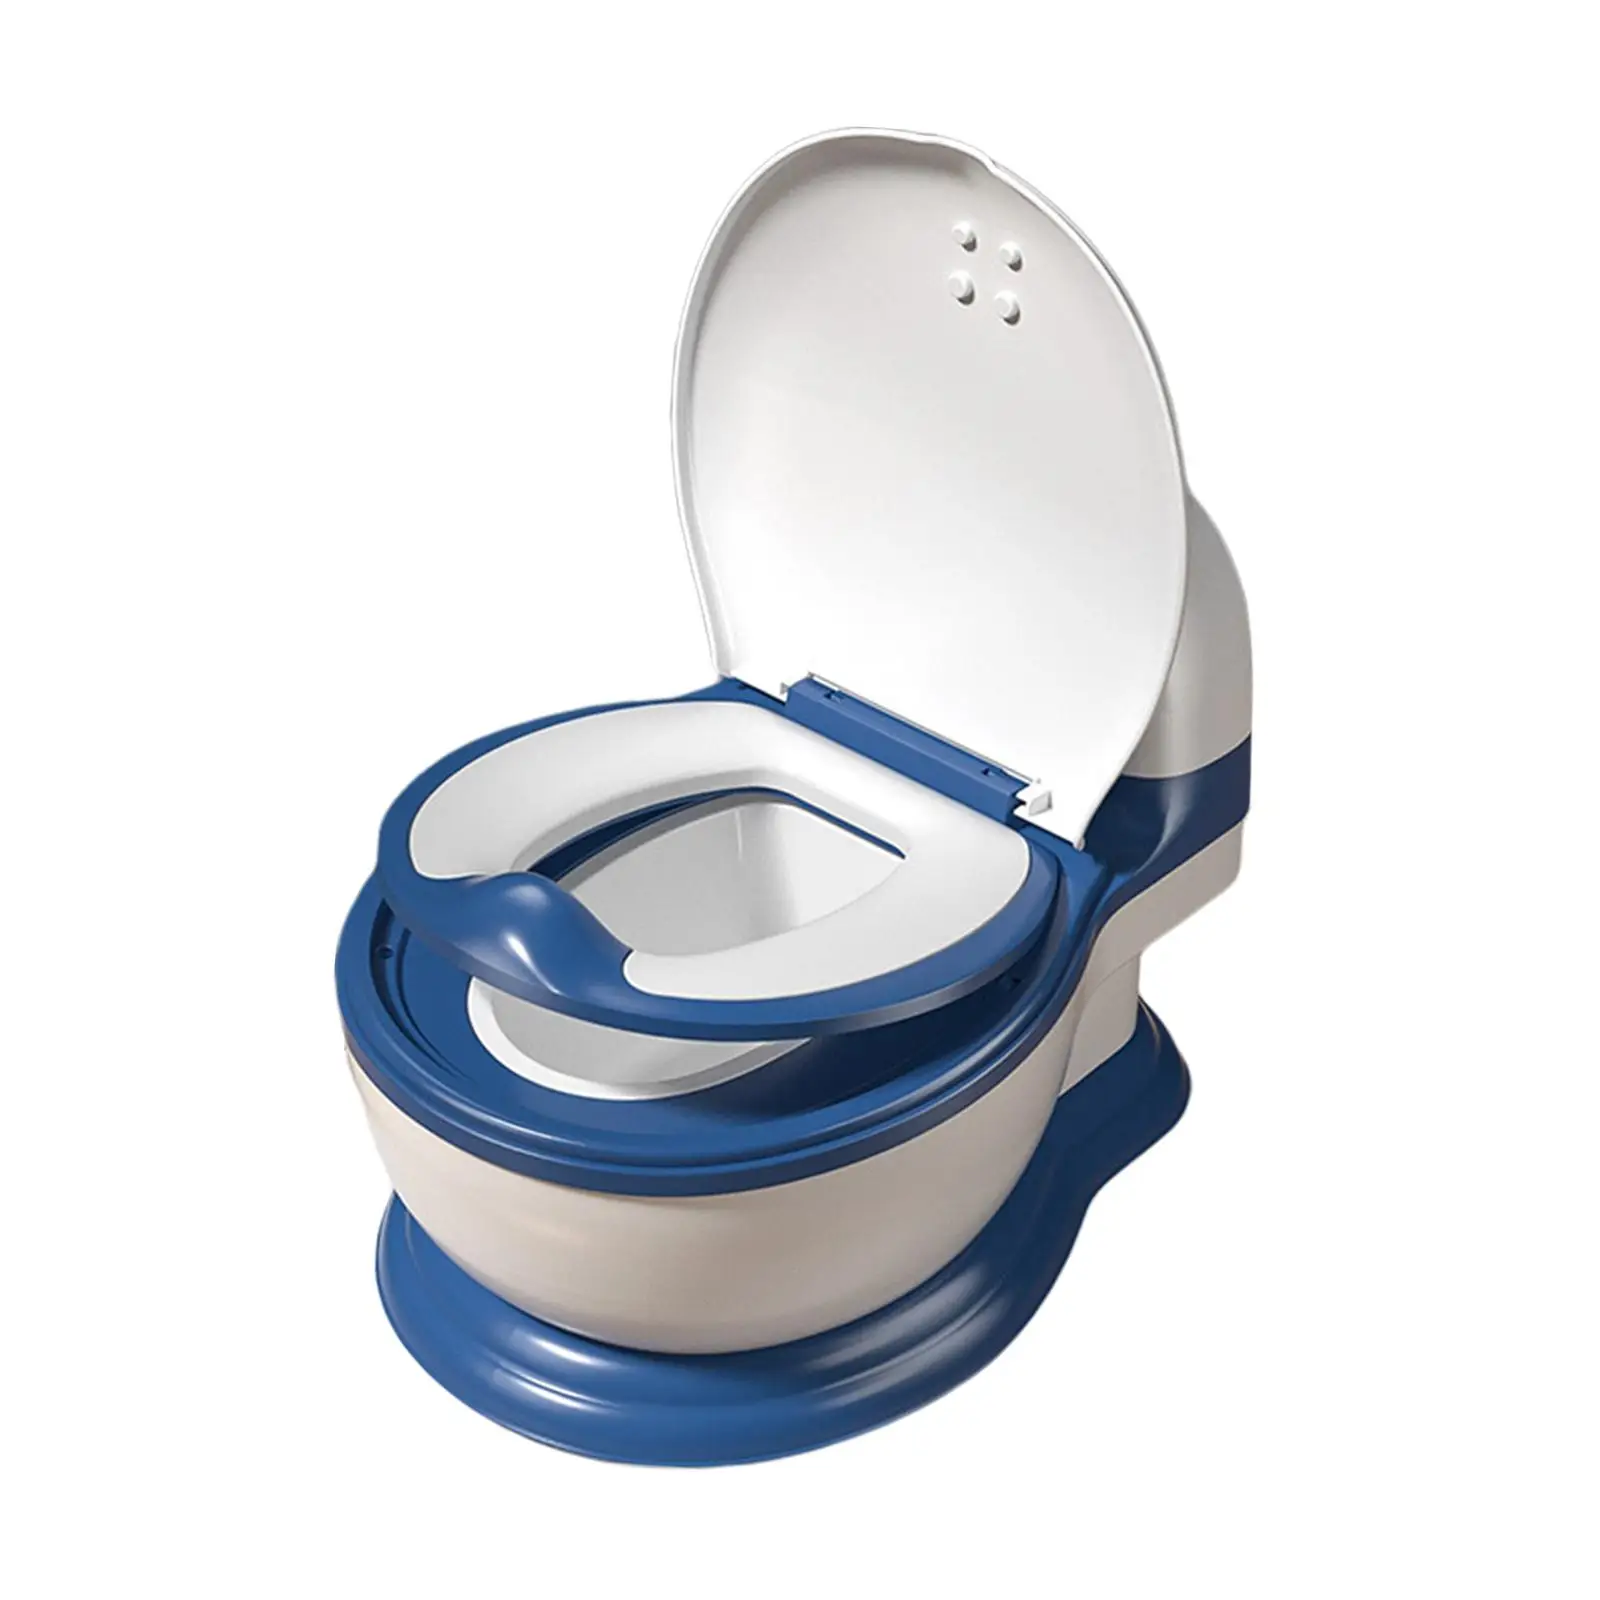 Training Transition Potty Seat Removable Comfortable Portable Anti Slip Real Feel Potty for Indoor Nursery Outdoor Bedroom Boys